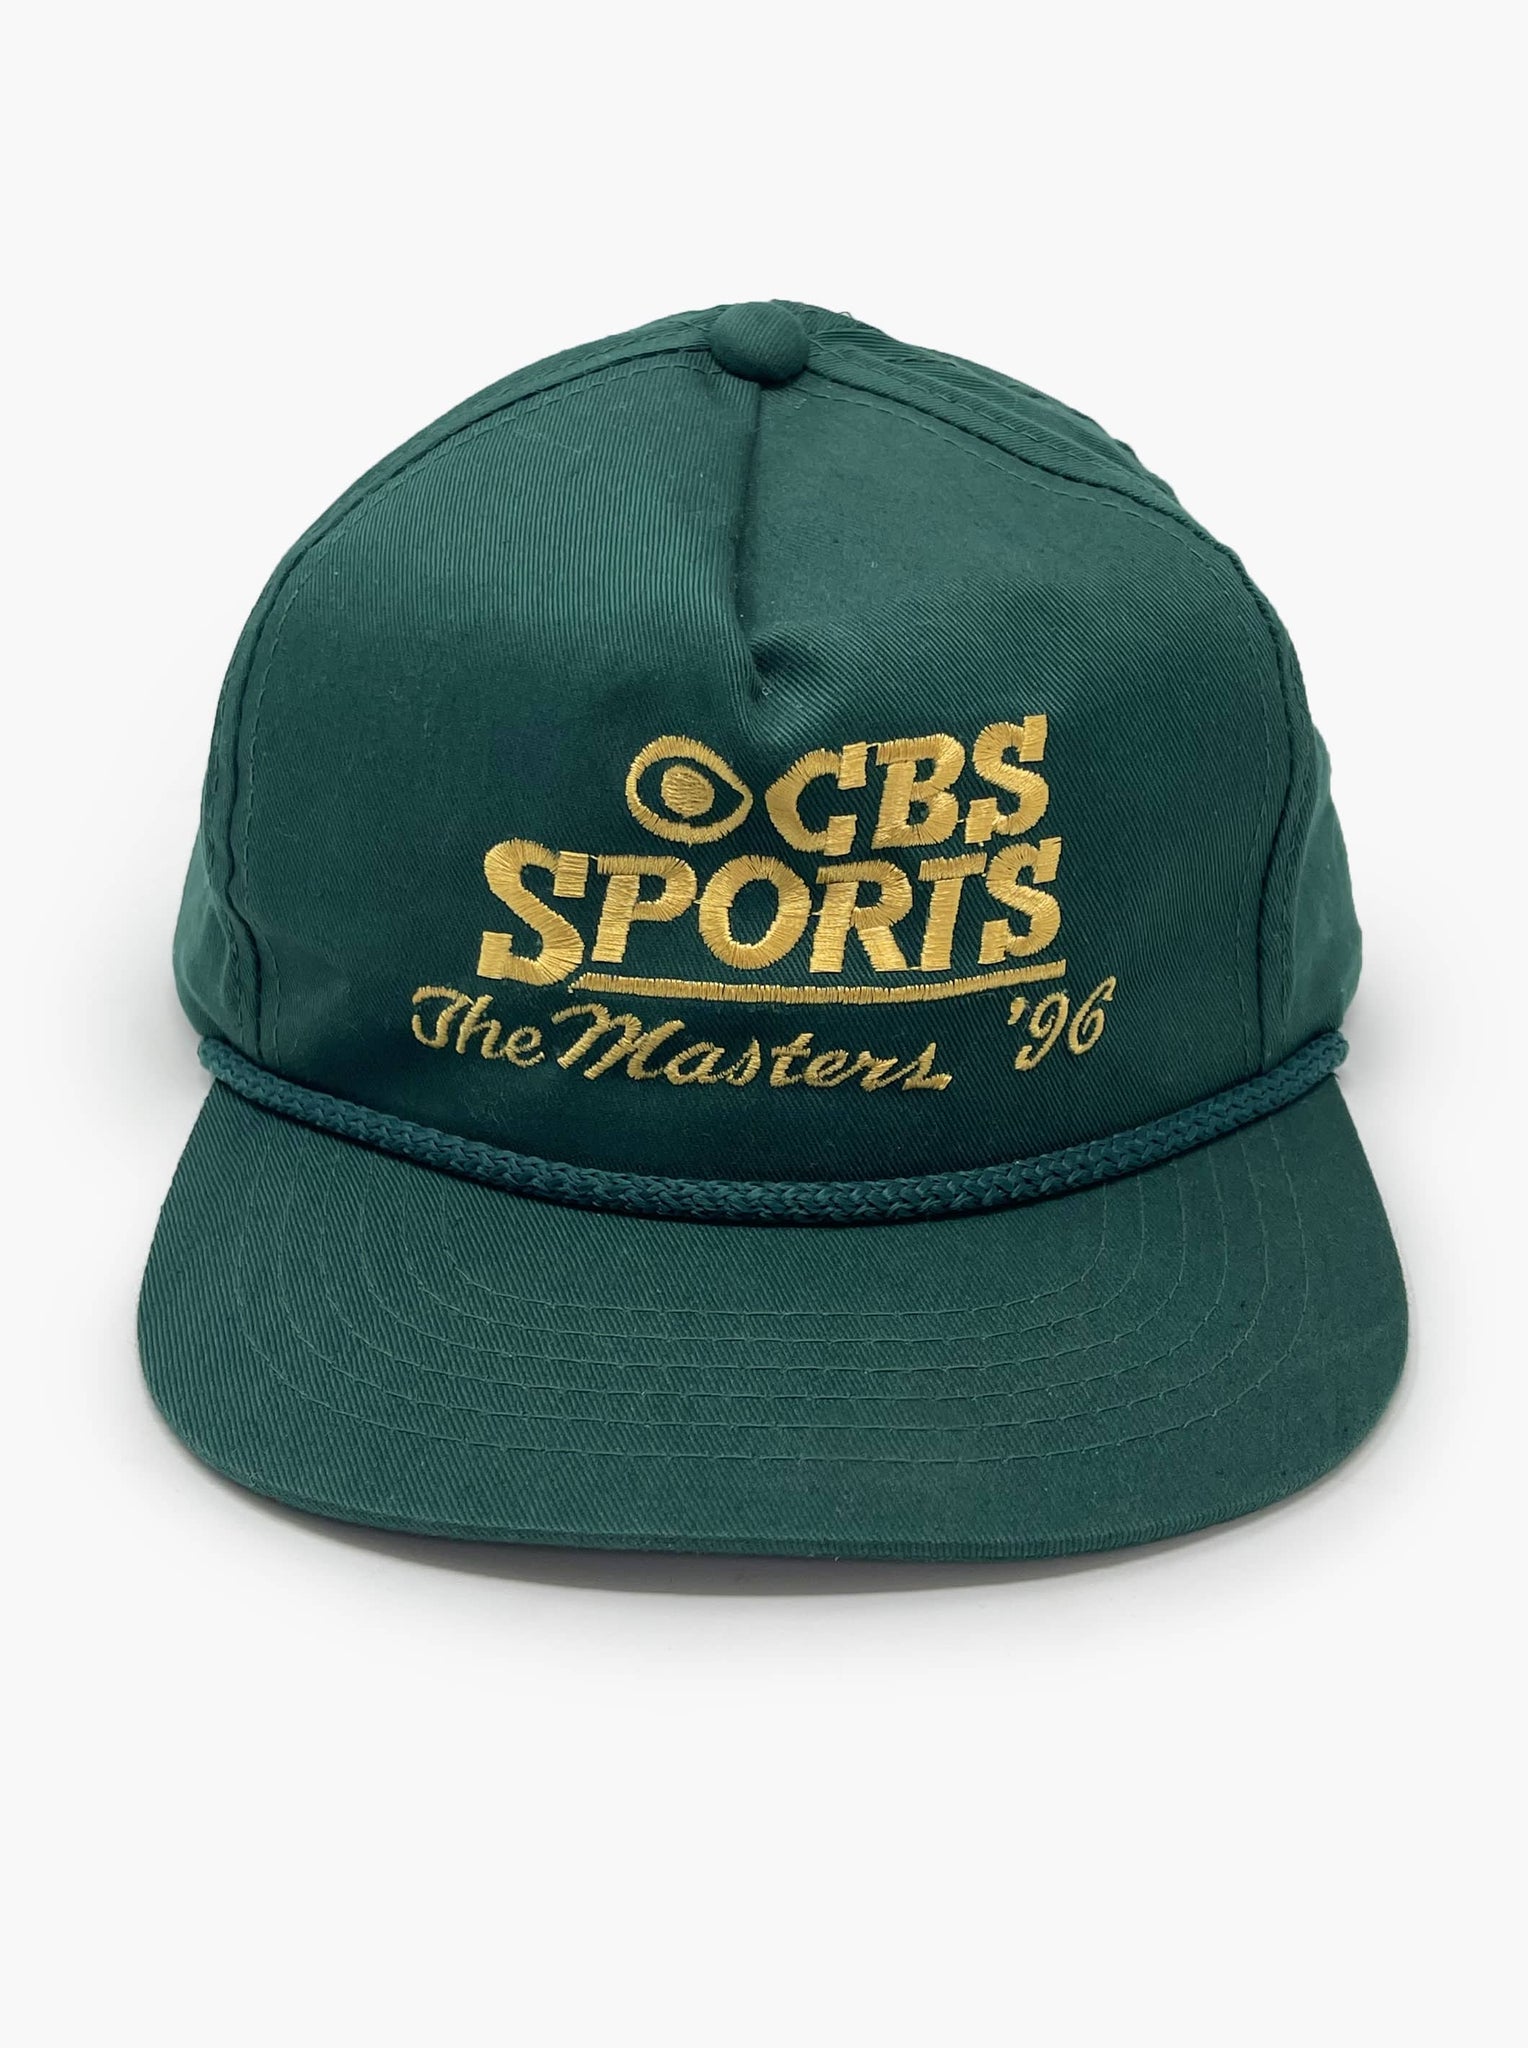 Vintage CBS Sports The Masters '96 Golf Hat